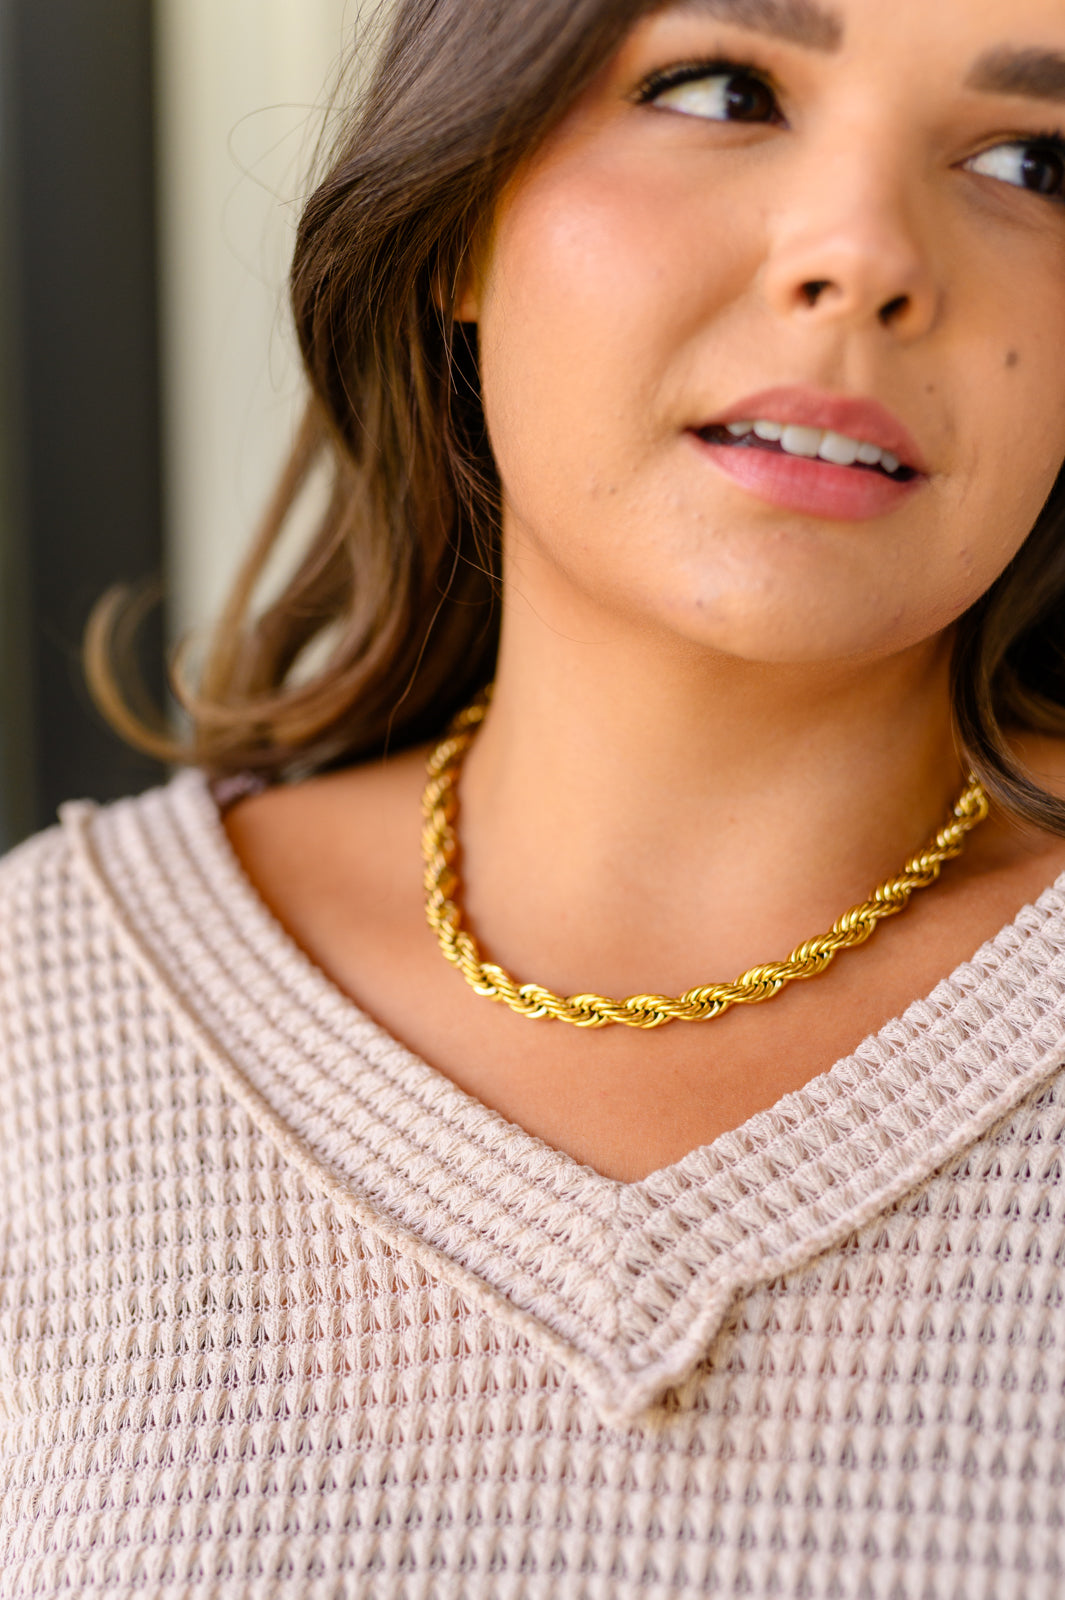 Waterproof Jewelry: Midas Touch Classic Rope Chain